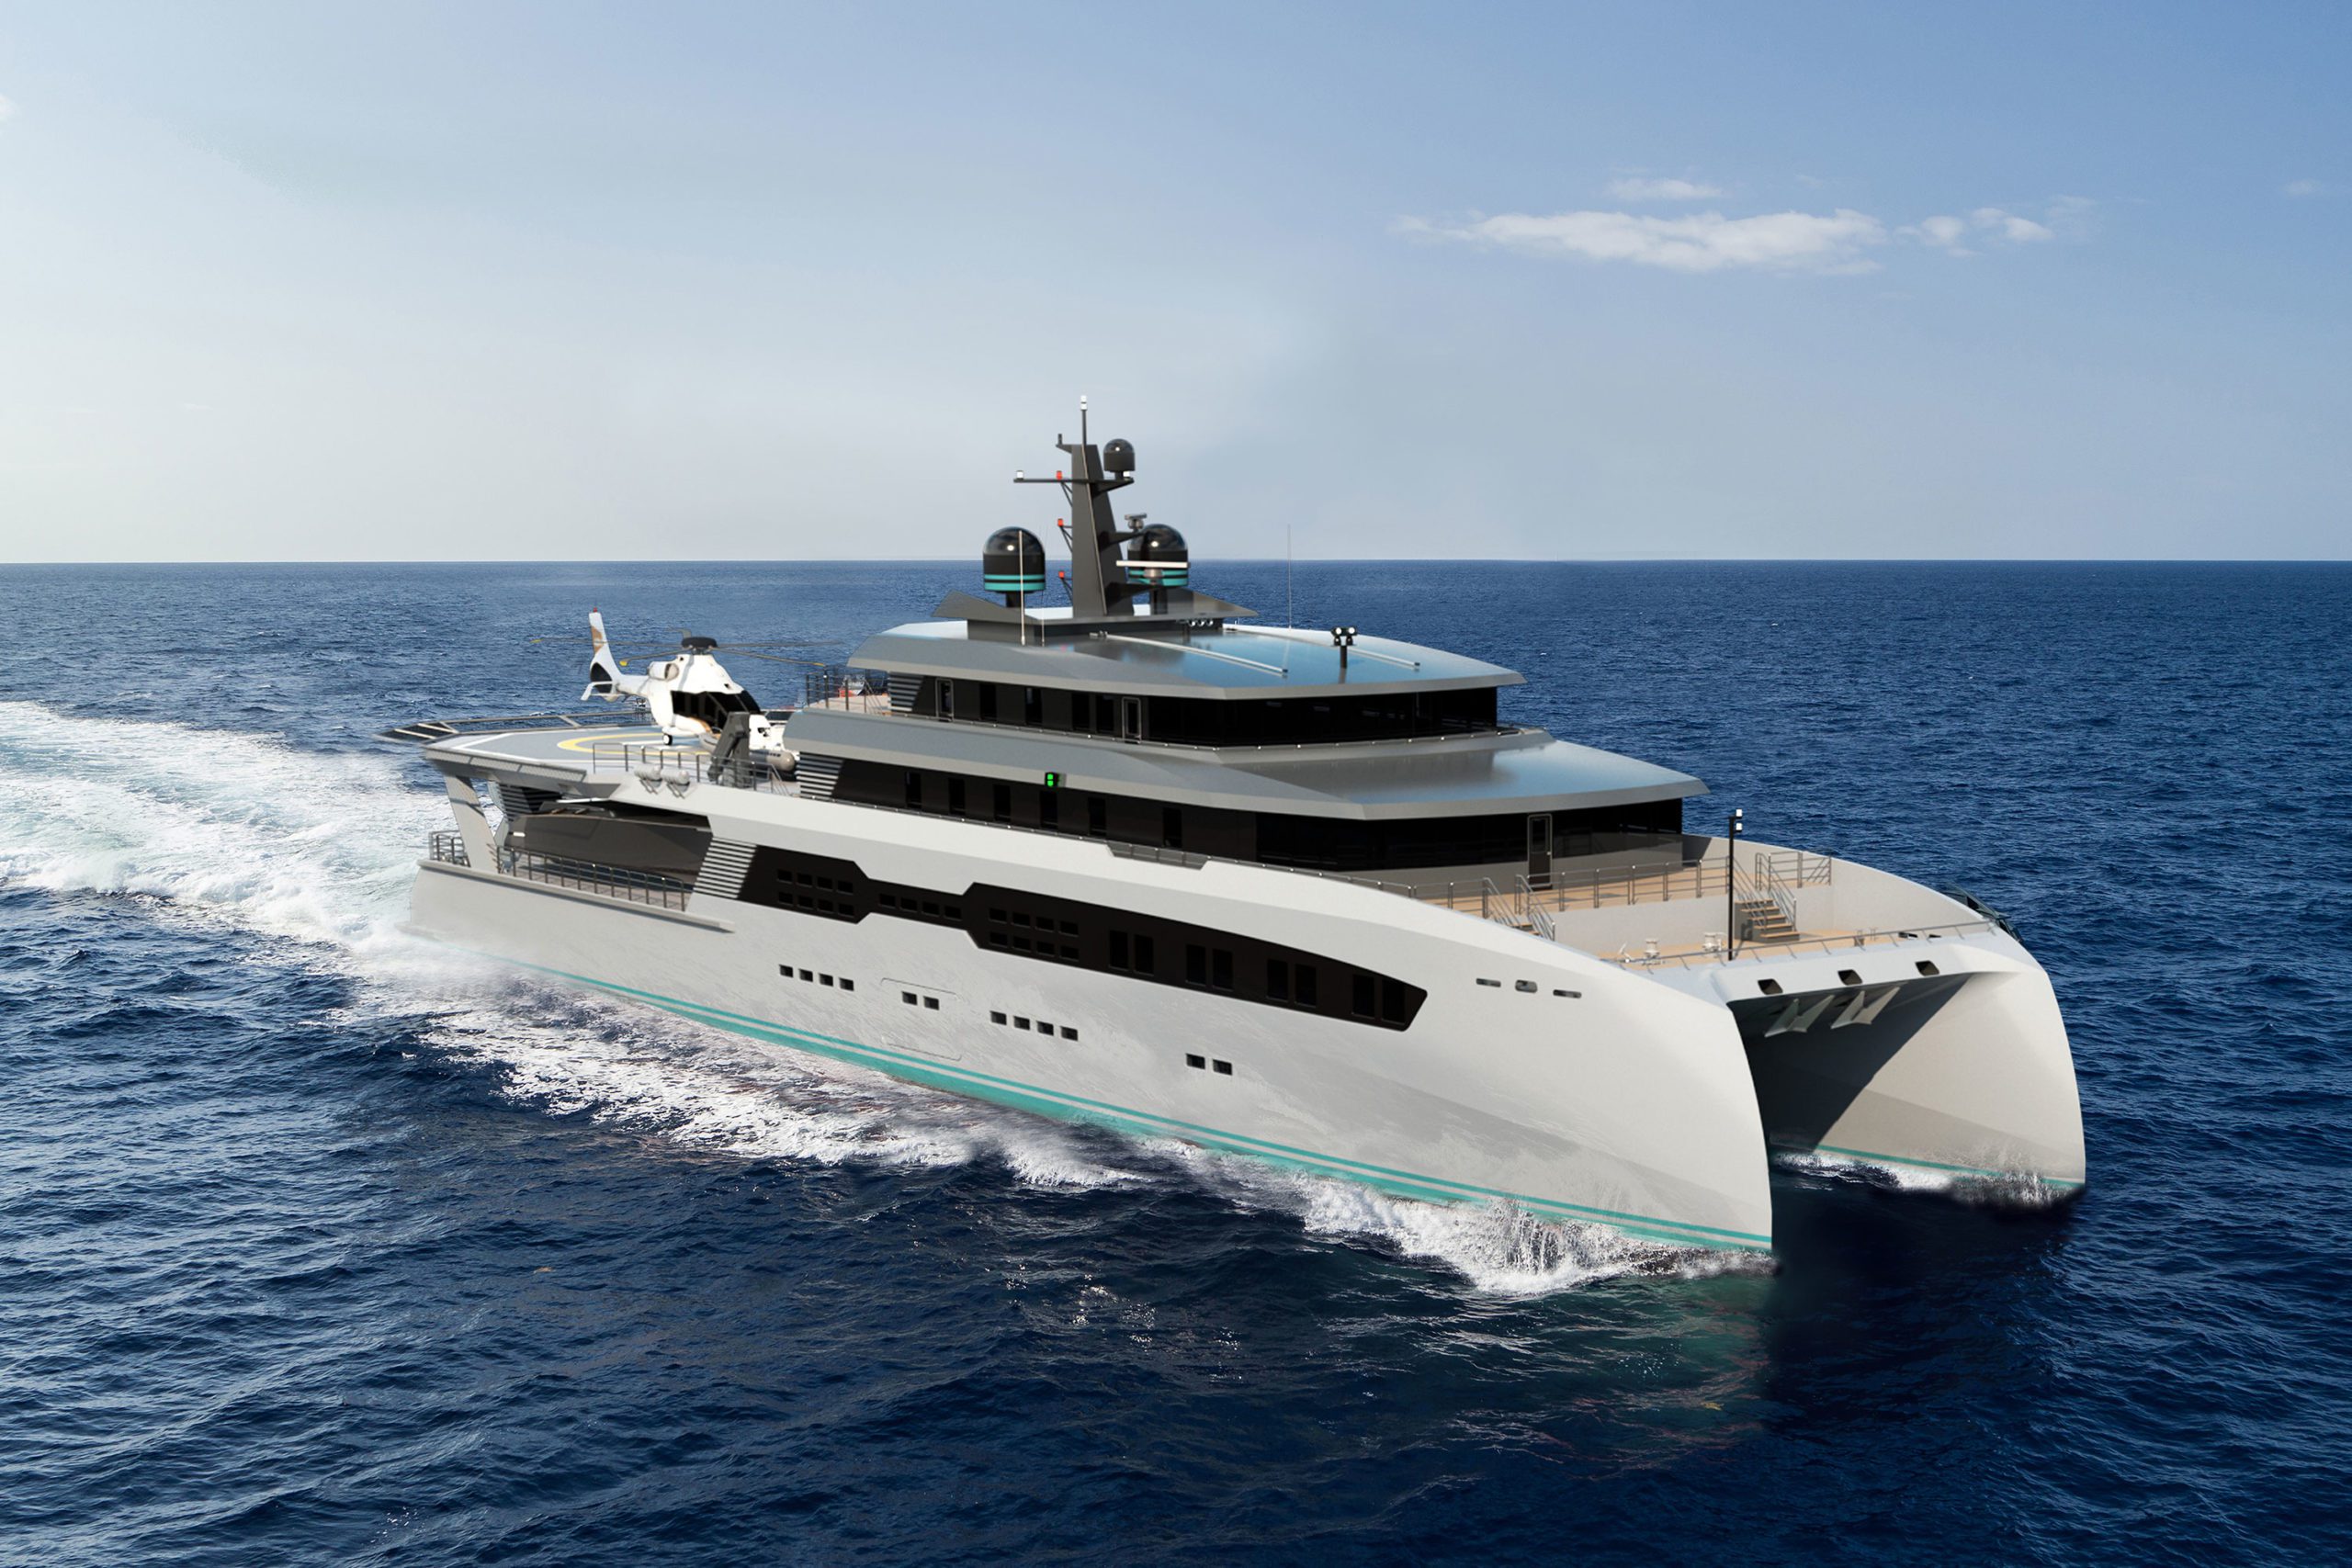 Incat Crowther Releases Details of Next ShadowCAT Concept